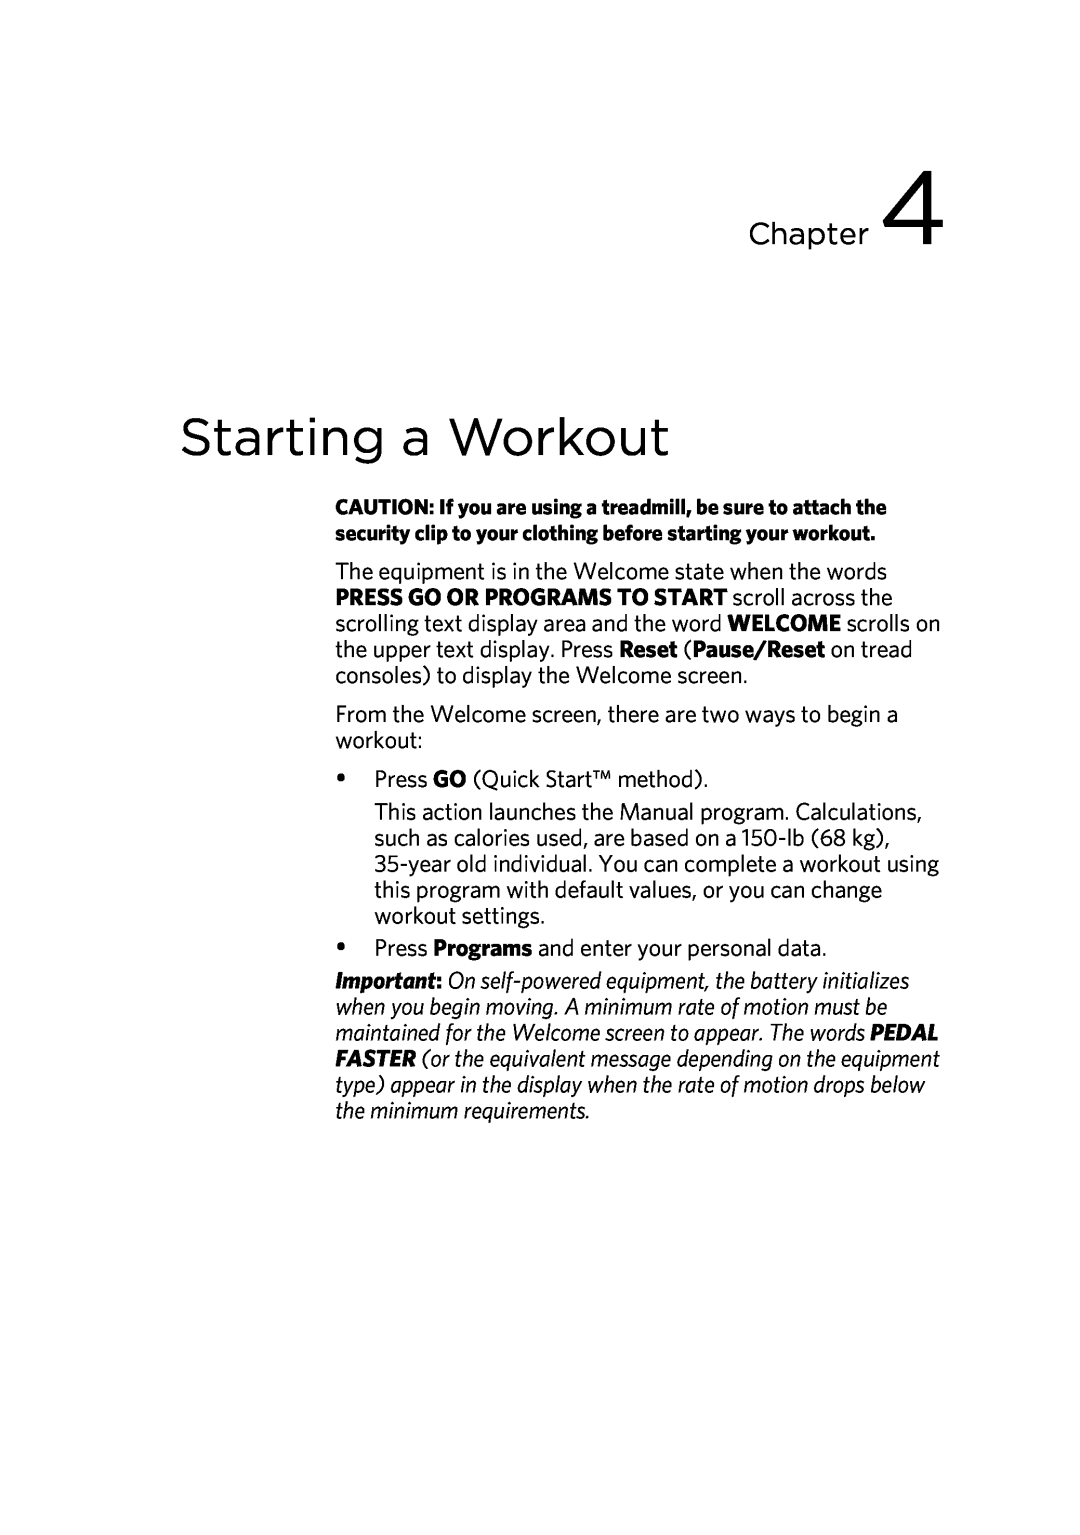 Precor 300753-201 manual Starting a Workout, Chapter, From the Welcome screen, there are two ways to begin a workout 